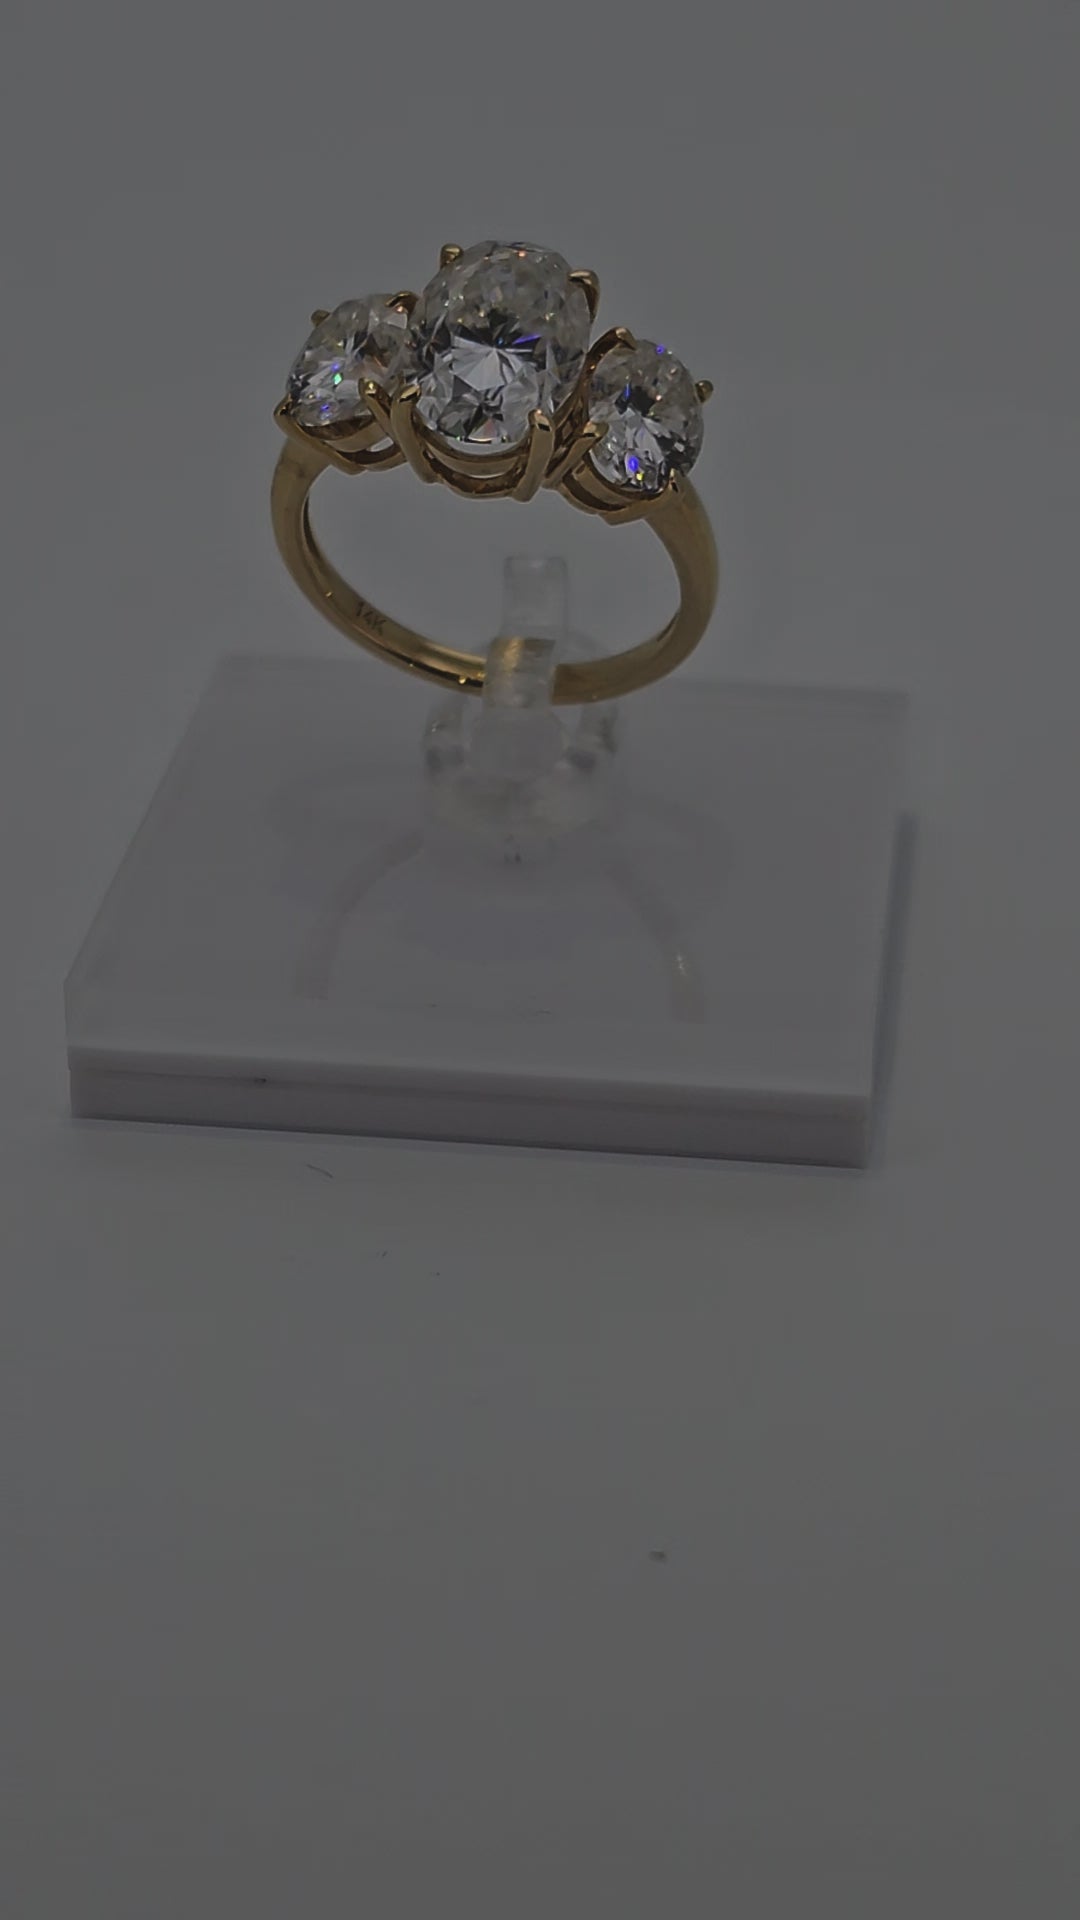 Video of 5.5 Carat Solid Gold 3 Stone Oval Cut Diamond Luxury Ring from Boujee Ice